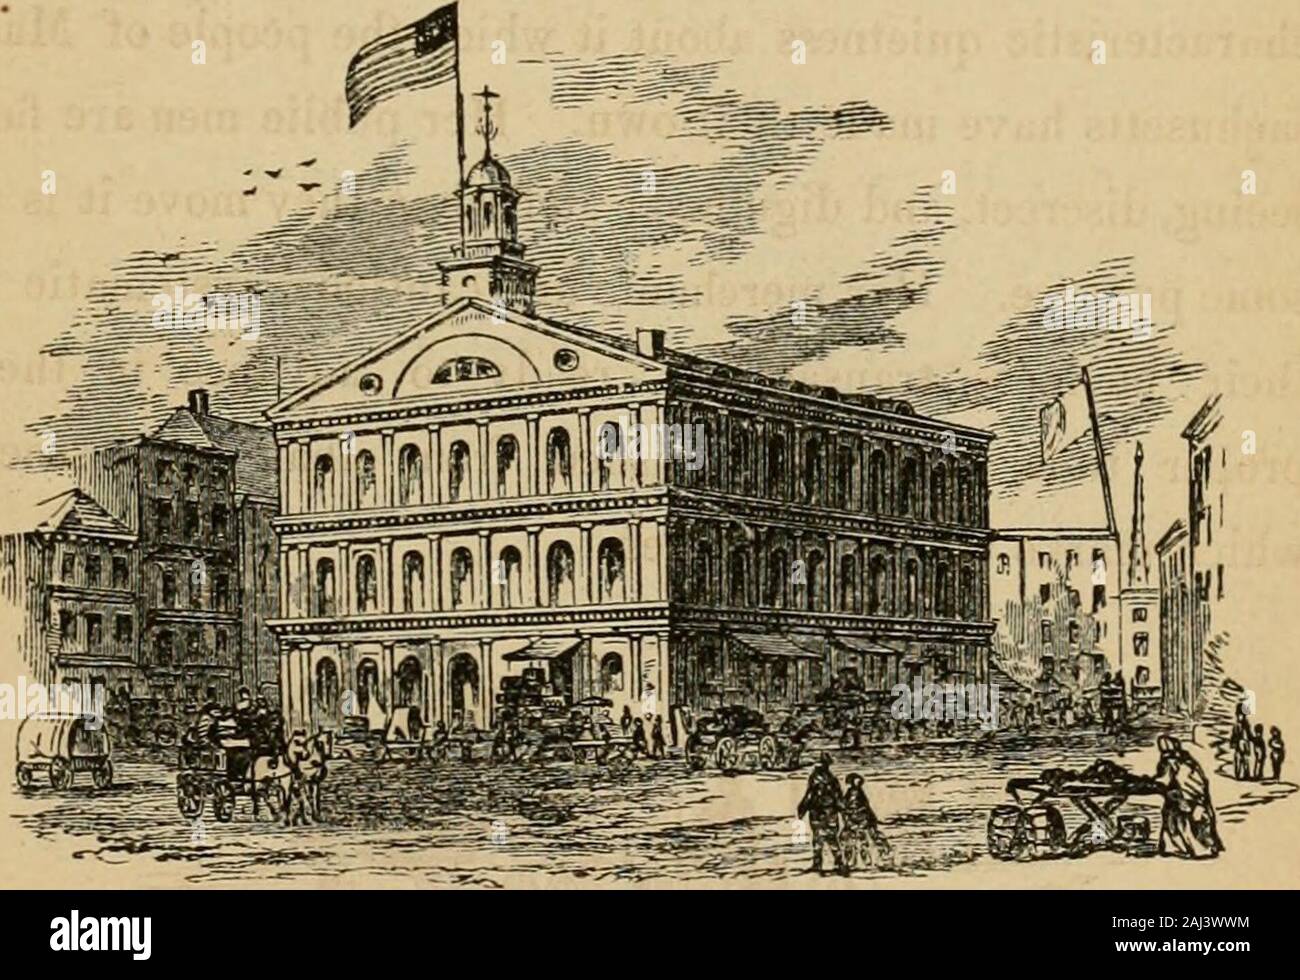 Guide to Boston and vicinity, with maps and engravings . CHAPTER II. PANEUIL HALL. FANEUIL HALL MARKET. CUSTOM HOUSE. — EXCHANGE. — OLD STATE HOUSE.. Faneuil Hall is ofteu by Bostonians and otliers styled ••The Cradle of American Liberty. Not to Bos- 7 8 BOSTON AND VICINITY. ton alone, but to the entire country, does it seem tobelong; for in the annals of America it holds a fore-most and most honorable position. Within its wallssome of the tinest speeiniens of American eloquence thathave been heard from the days of Washington to thoseof Webster were delivered. When despotism threatenedthe colo Stock Photo